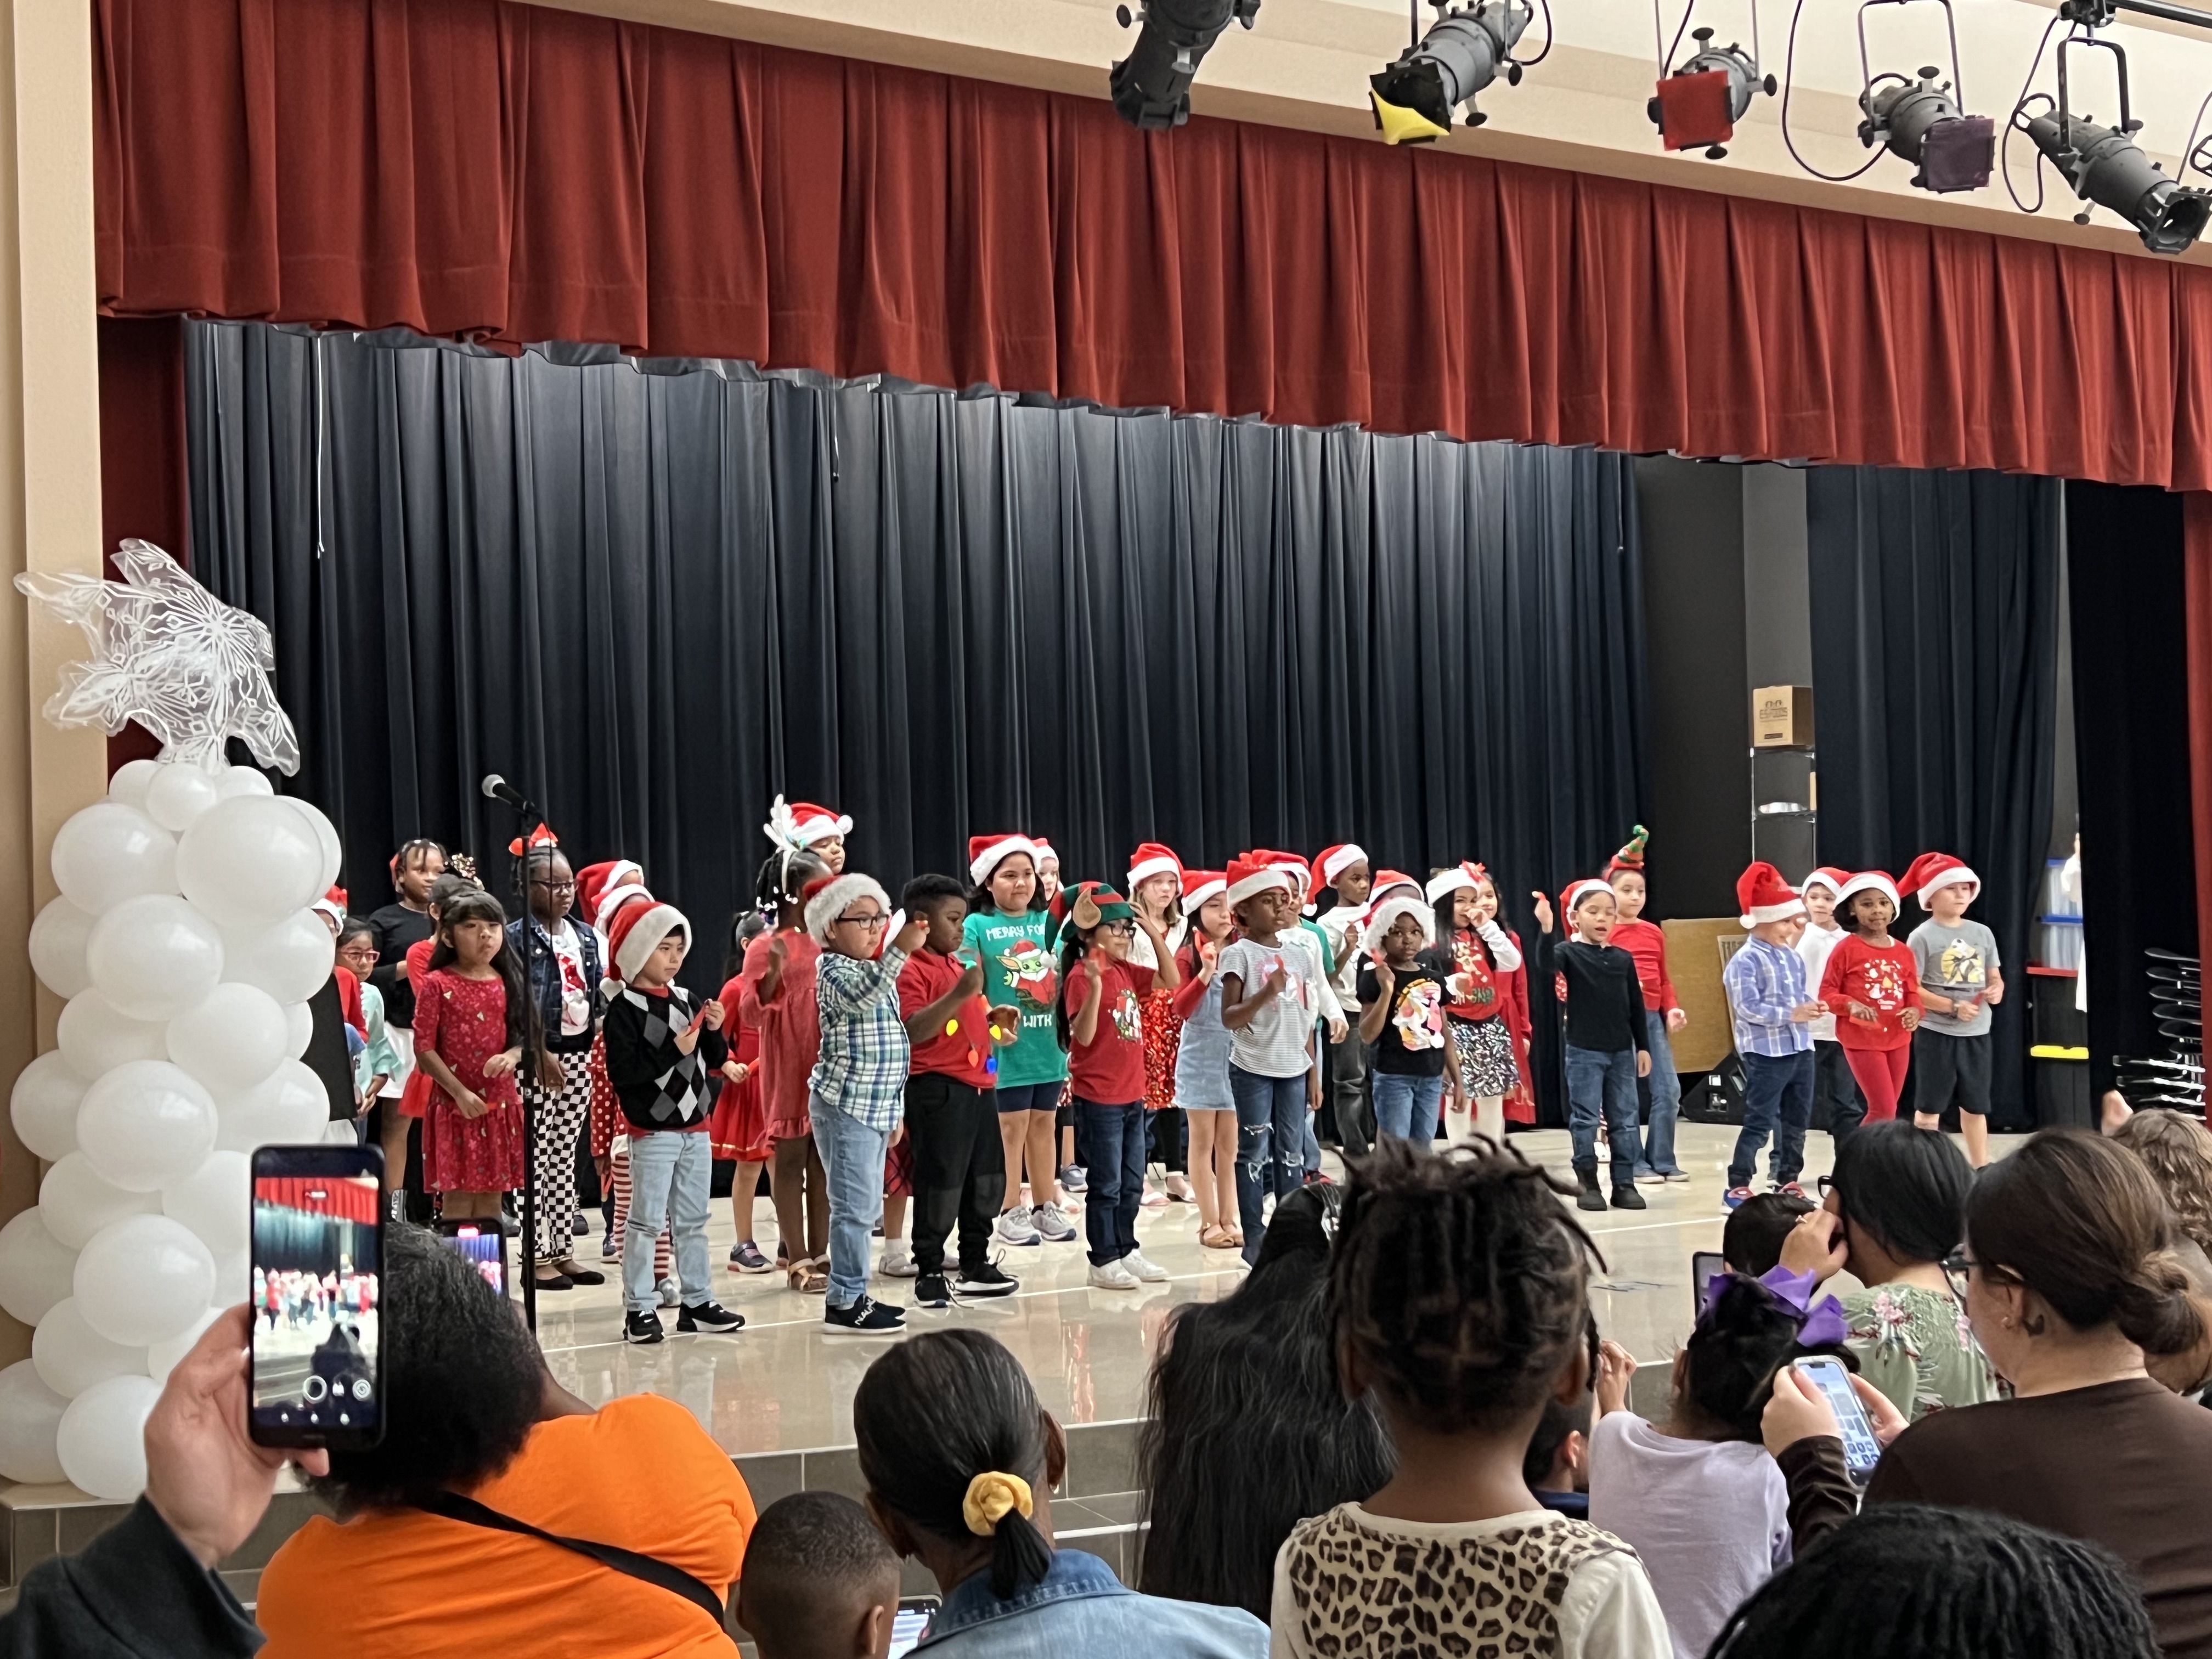 elementary aged students perform on stage wearing Santa hats